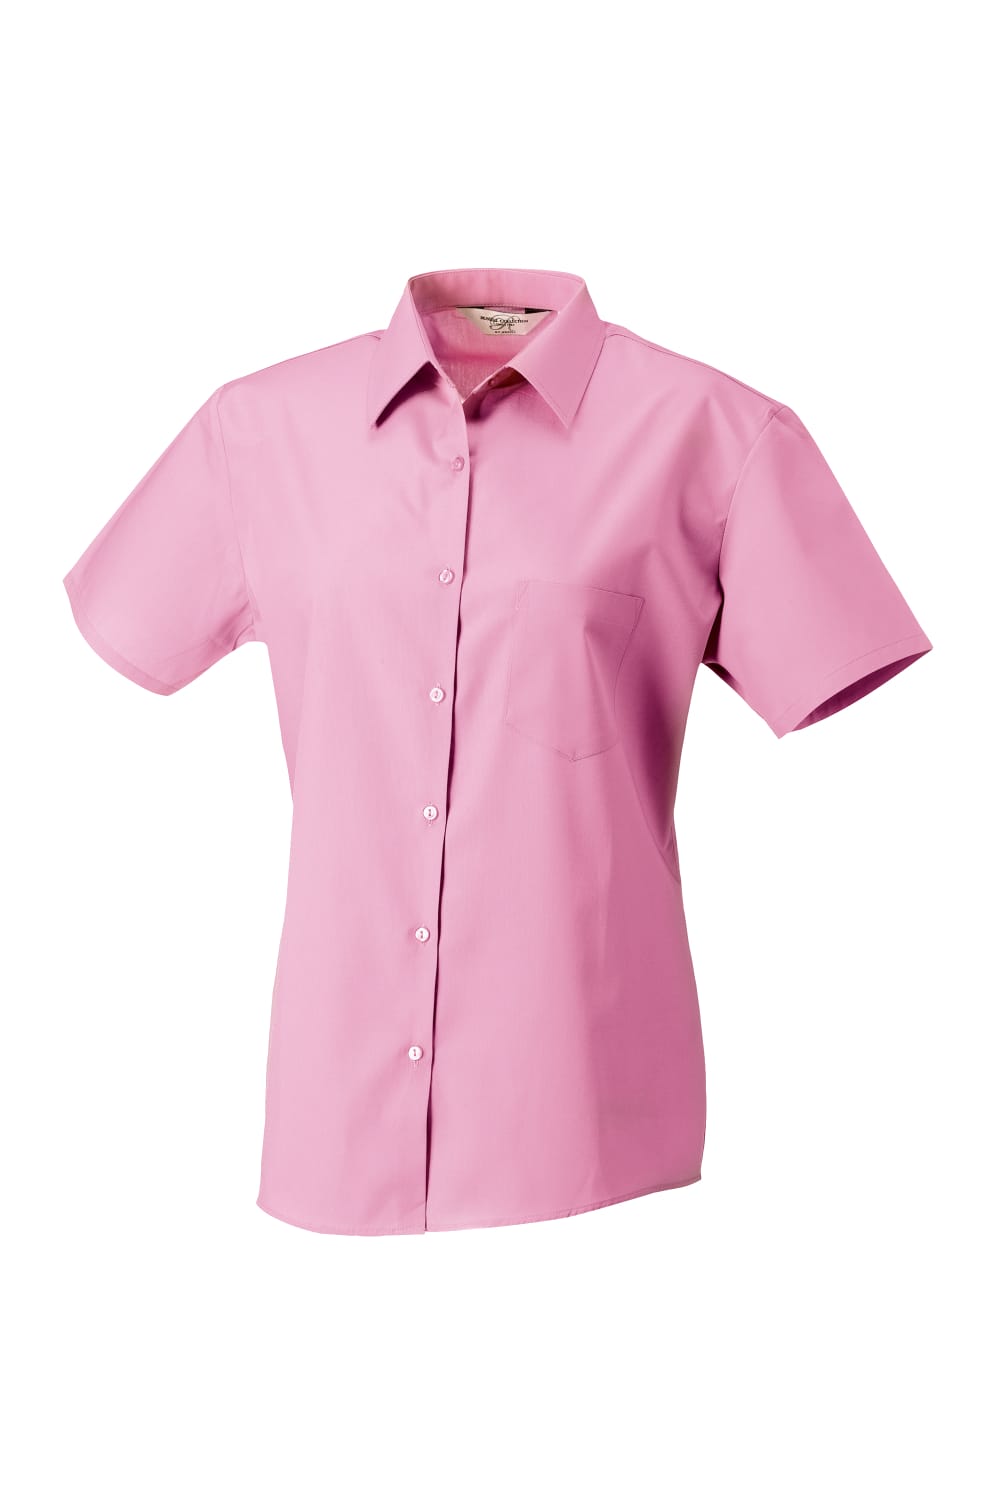 Russell Collection Womens/Ladies Short Sleeve Pure Cotton Easy Care Poplin Shirt (Bright Pink)